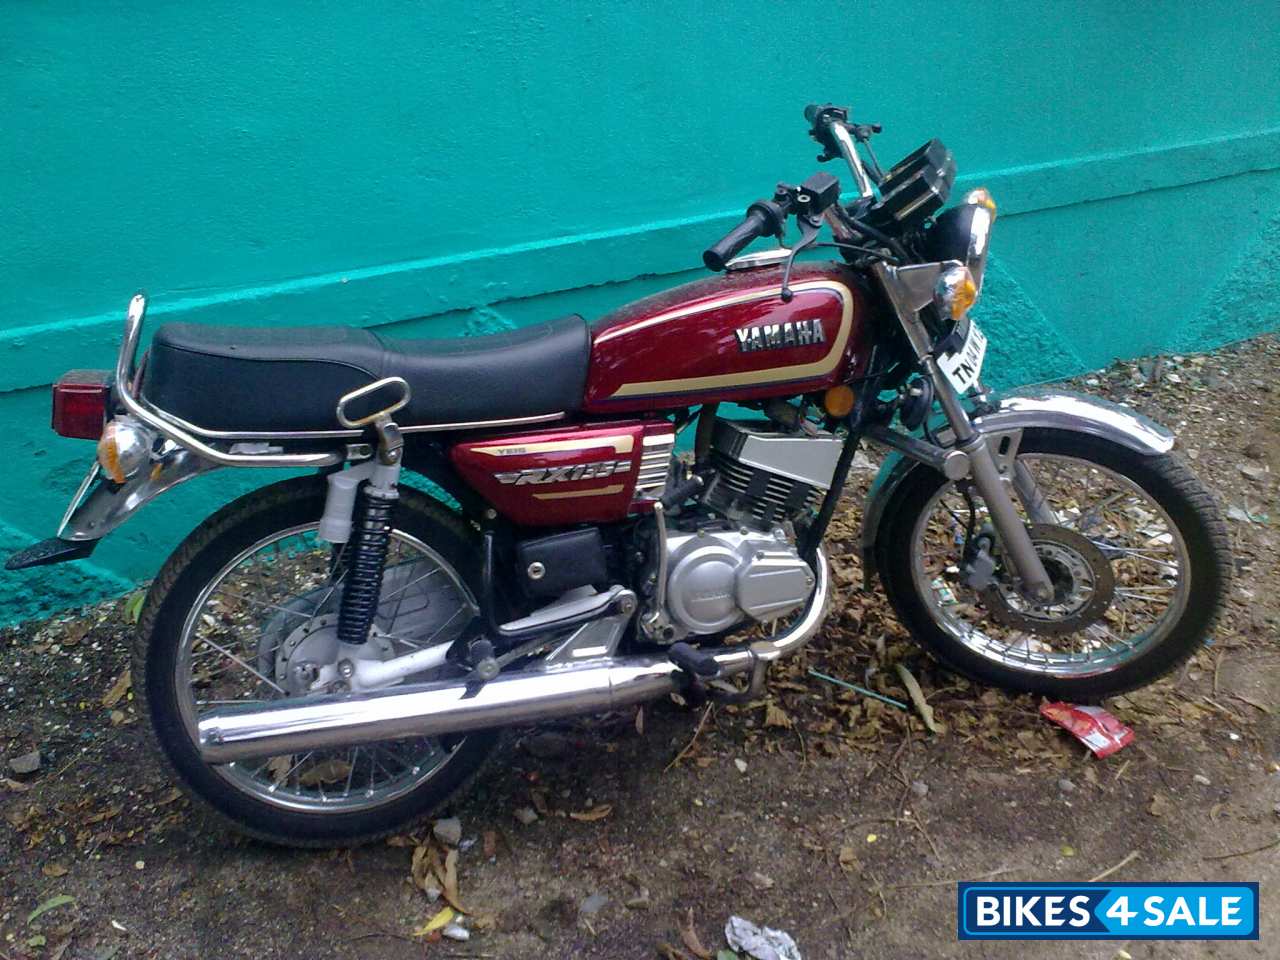 Used 2000 model Yamaha RX 135 for sale in Chennai. ID 30766 - Bikes4Sale